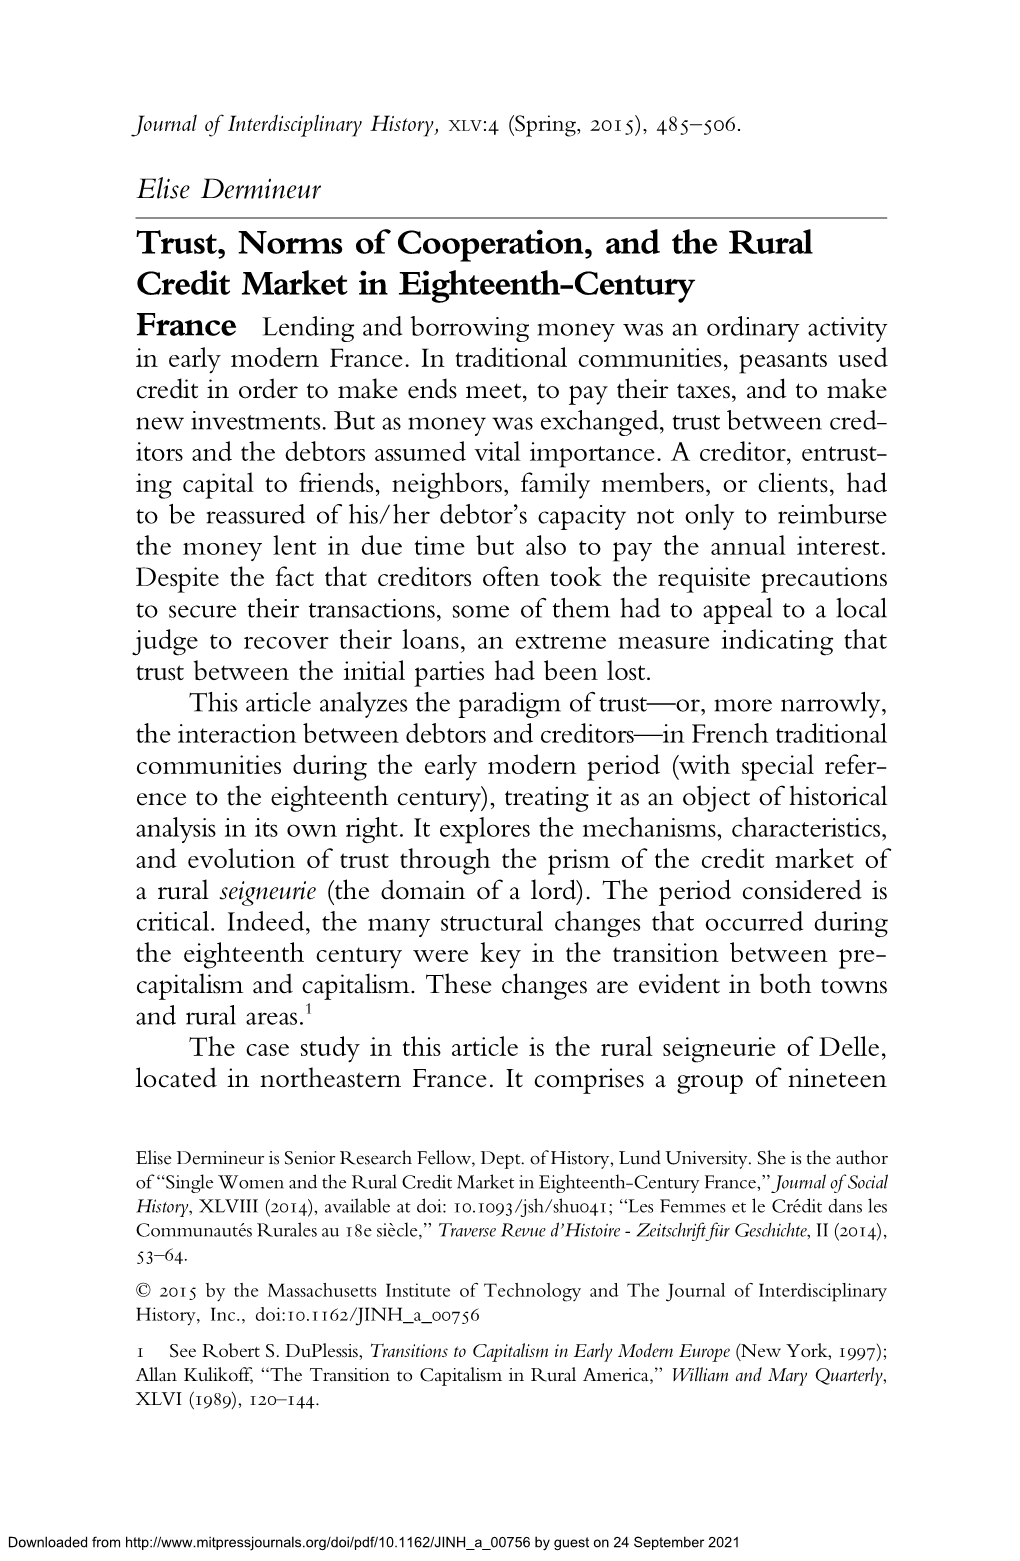 Trust, Norms of Cooperation, and the Rural Credit Market in Eighteenth-Century France Lending and Borrowing Money Was an Ordinary Activity in Early Modern France